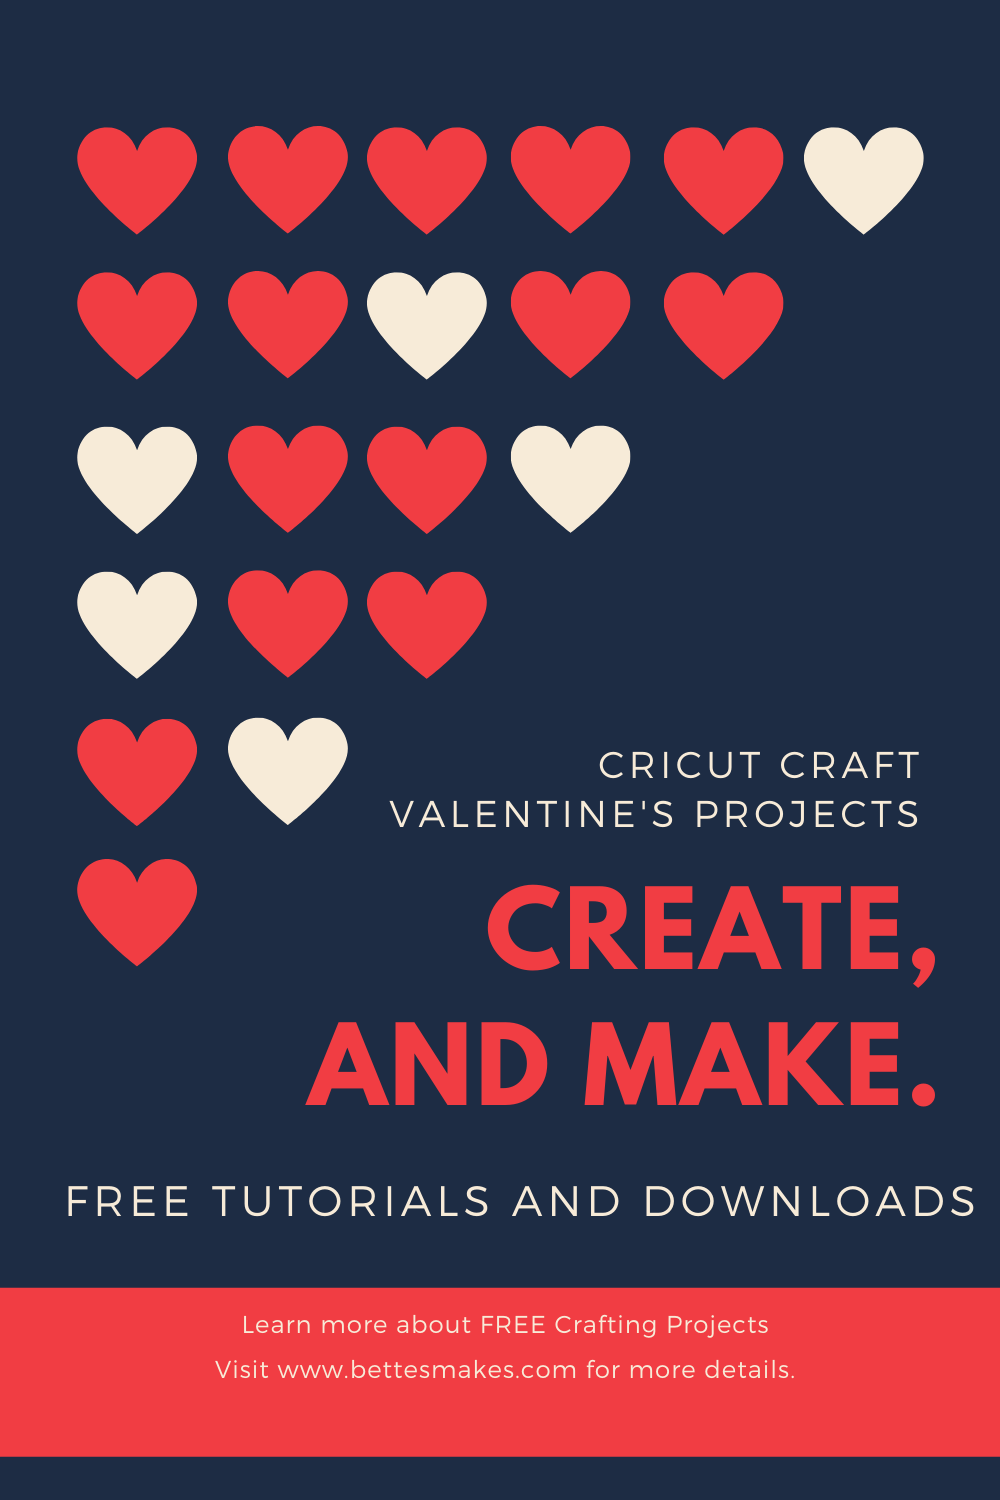 Cricut craft this Valentine popup card and give the gift of love. This is an easy to make handmade card project and perfect for giving to that someone special #cricut #cricutcraft #cardshandmade #papercraft #valentines